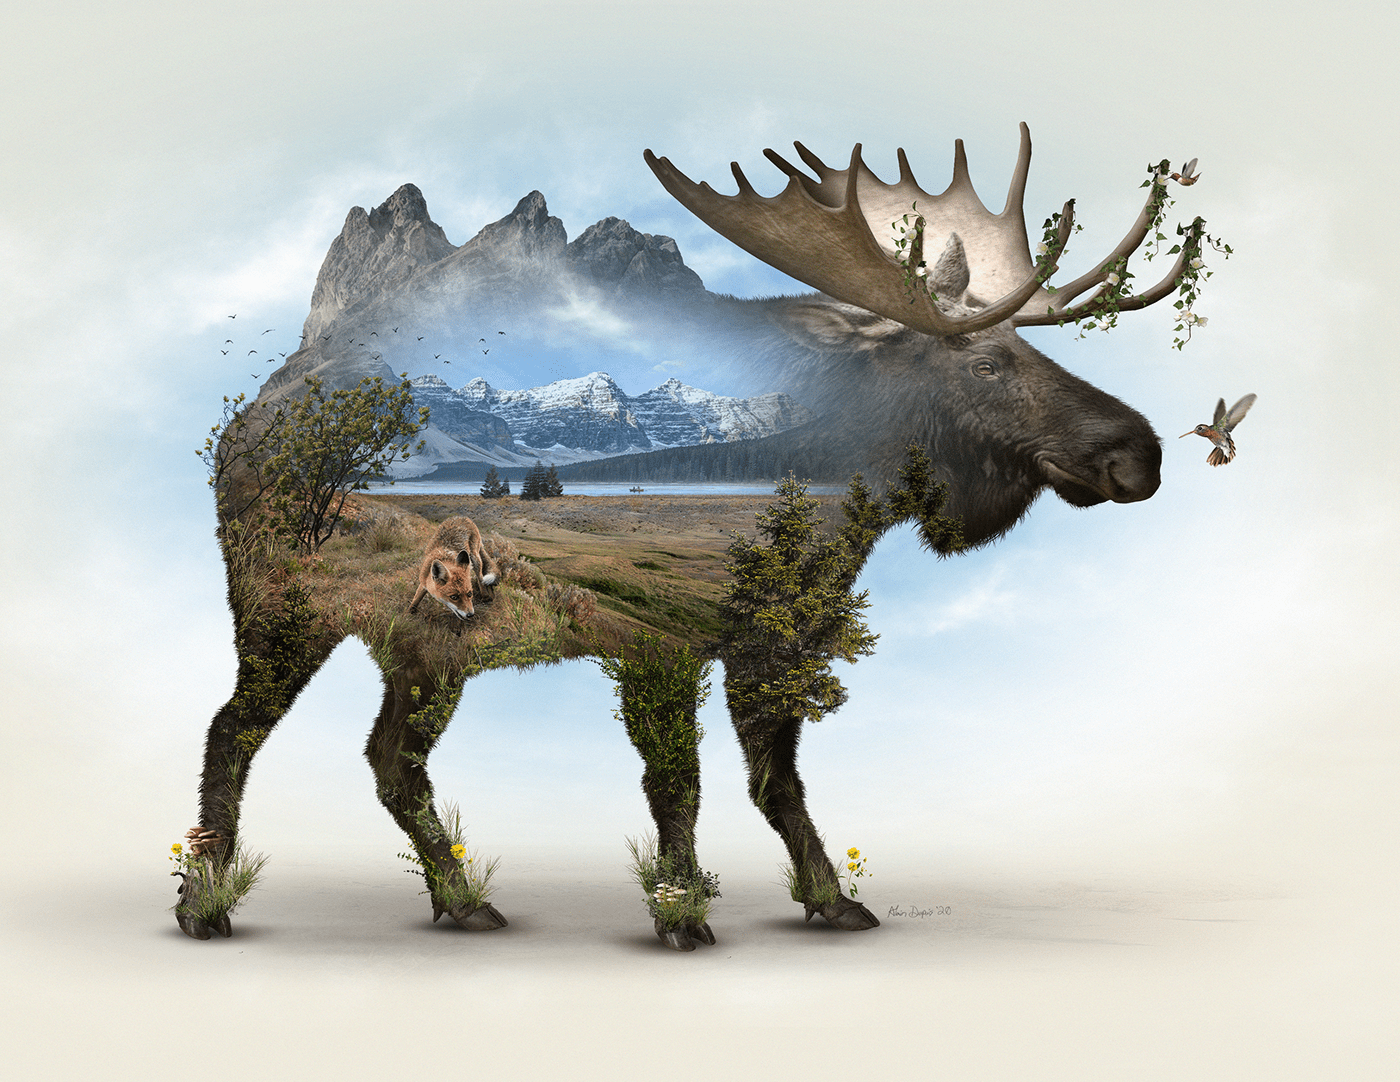 Photomanipulation featuring a number of animals in a surreal landscape set inside a double-exposure